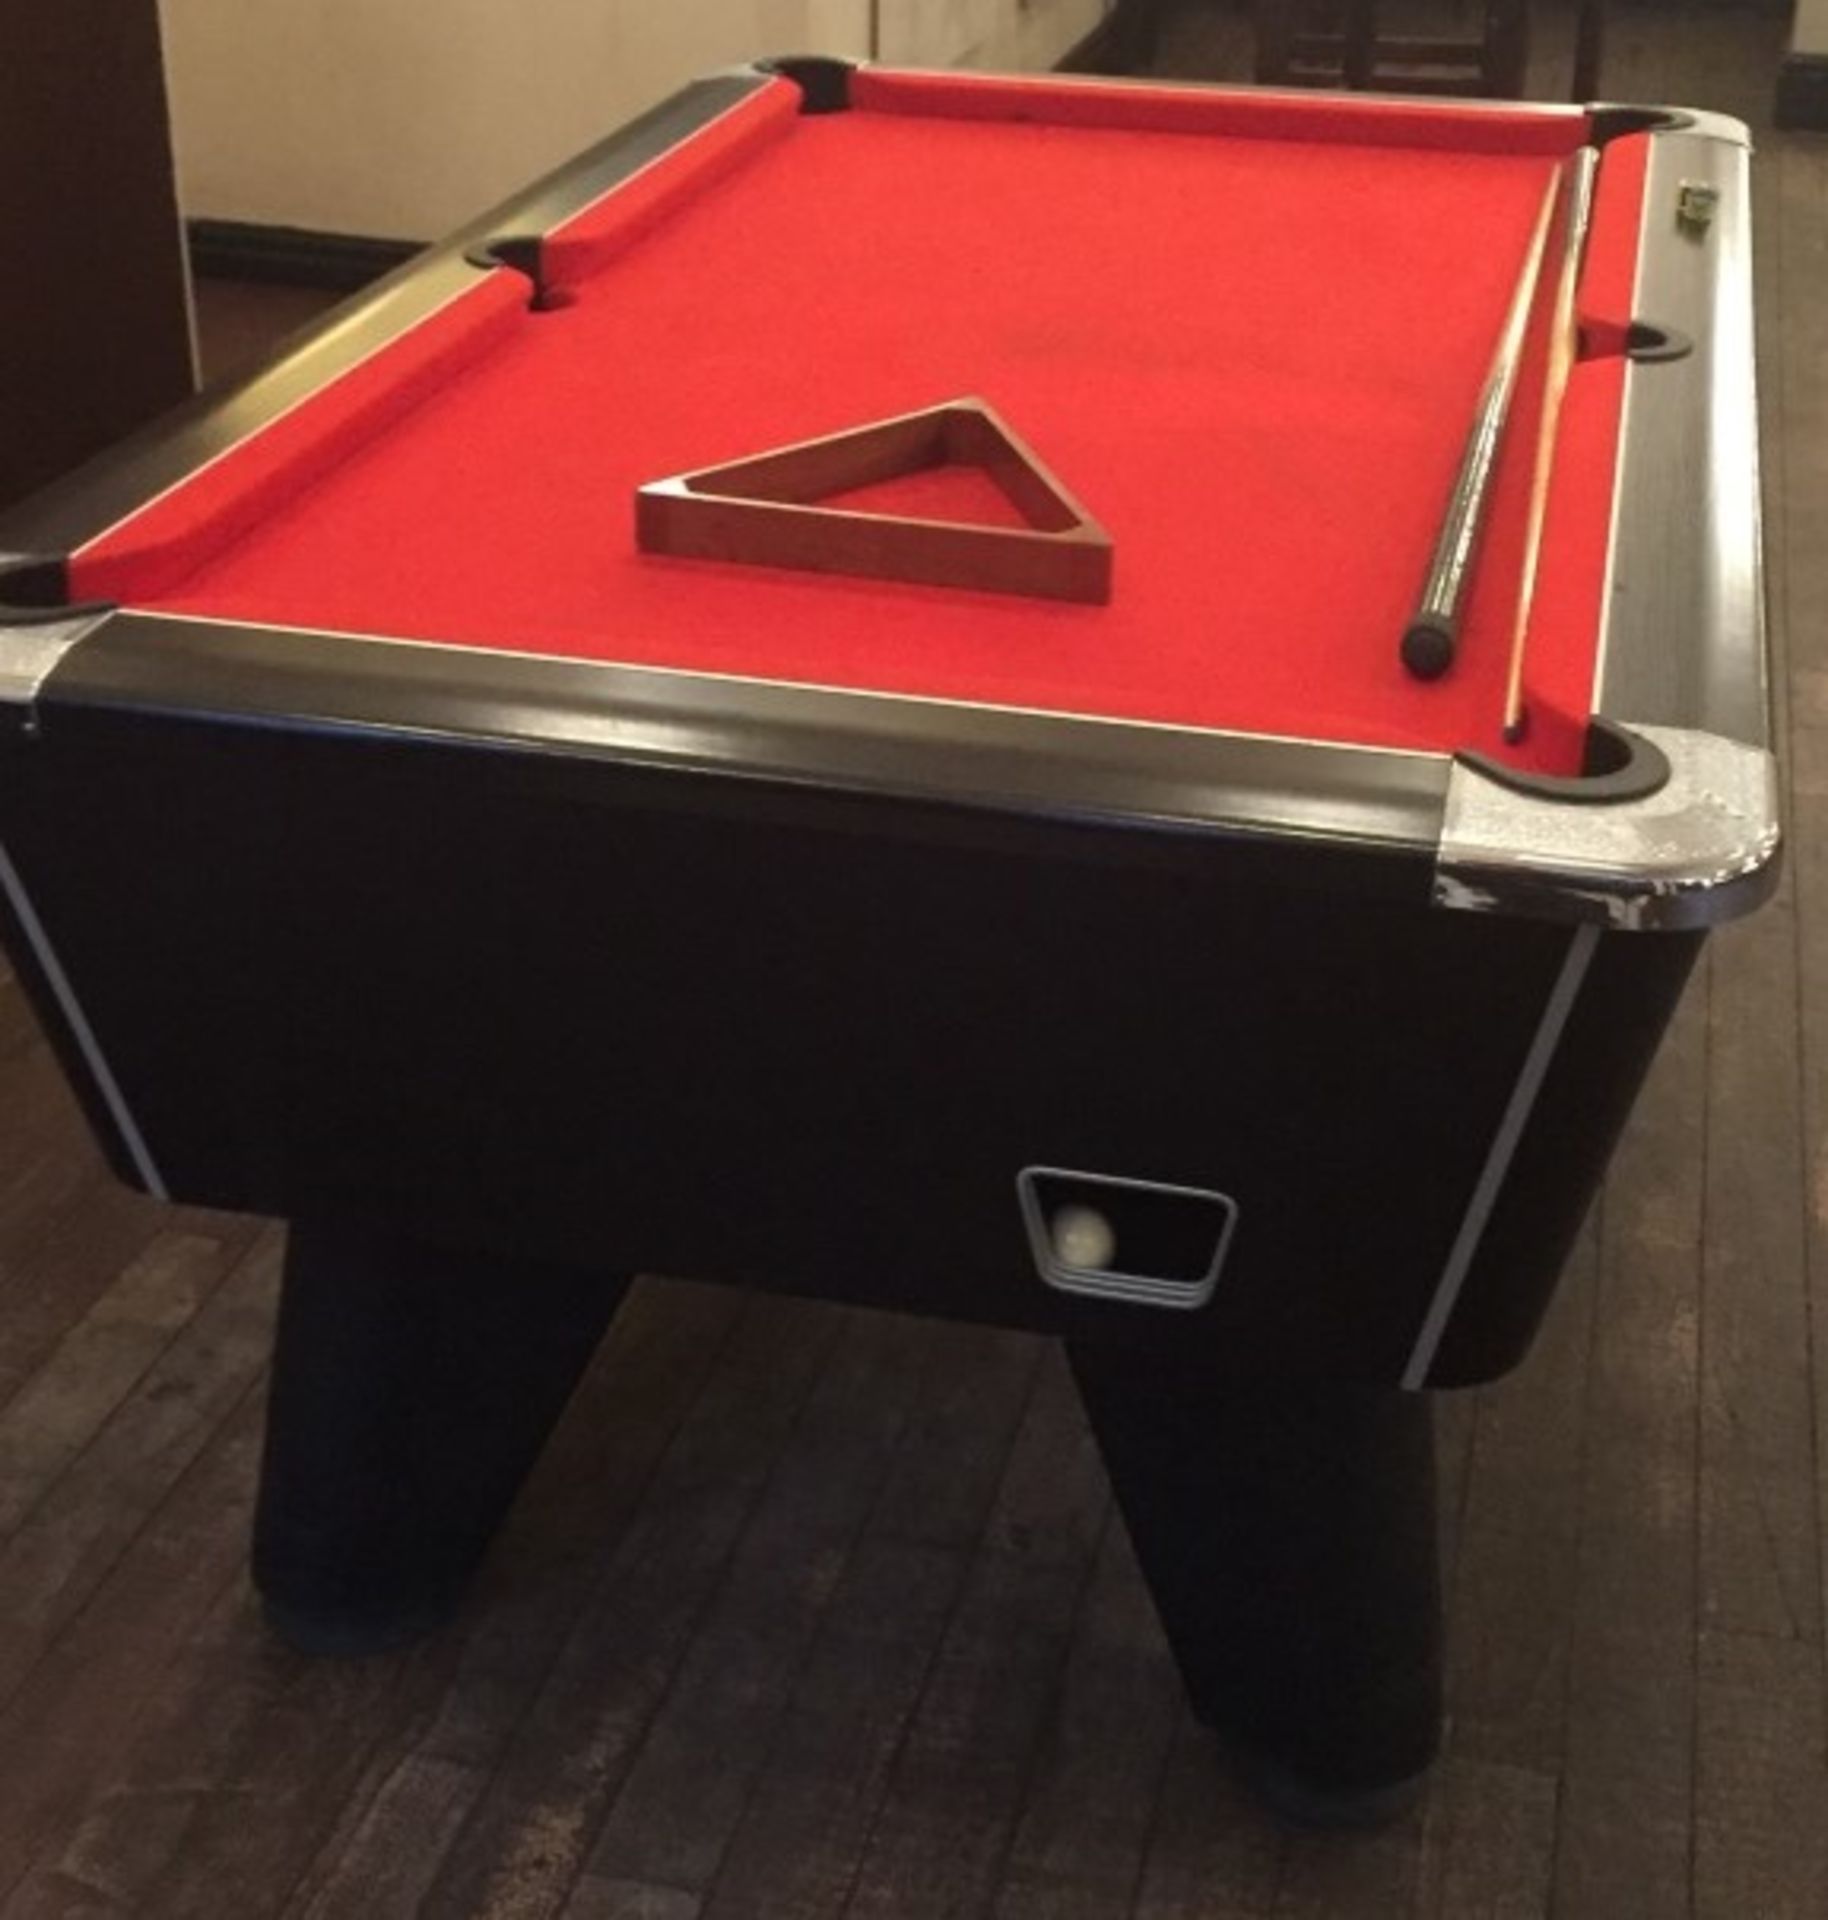 1 x Supreme "Winner" 6ft Commercial Coin-Operated Pool Table - Includes Balls, Triangle And 2 Cues - - Image 8 of 10